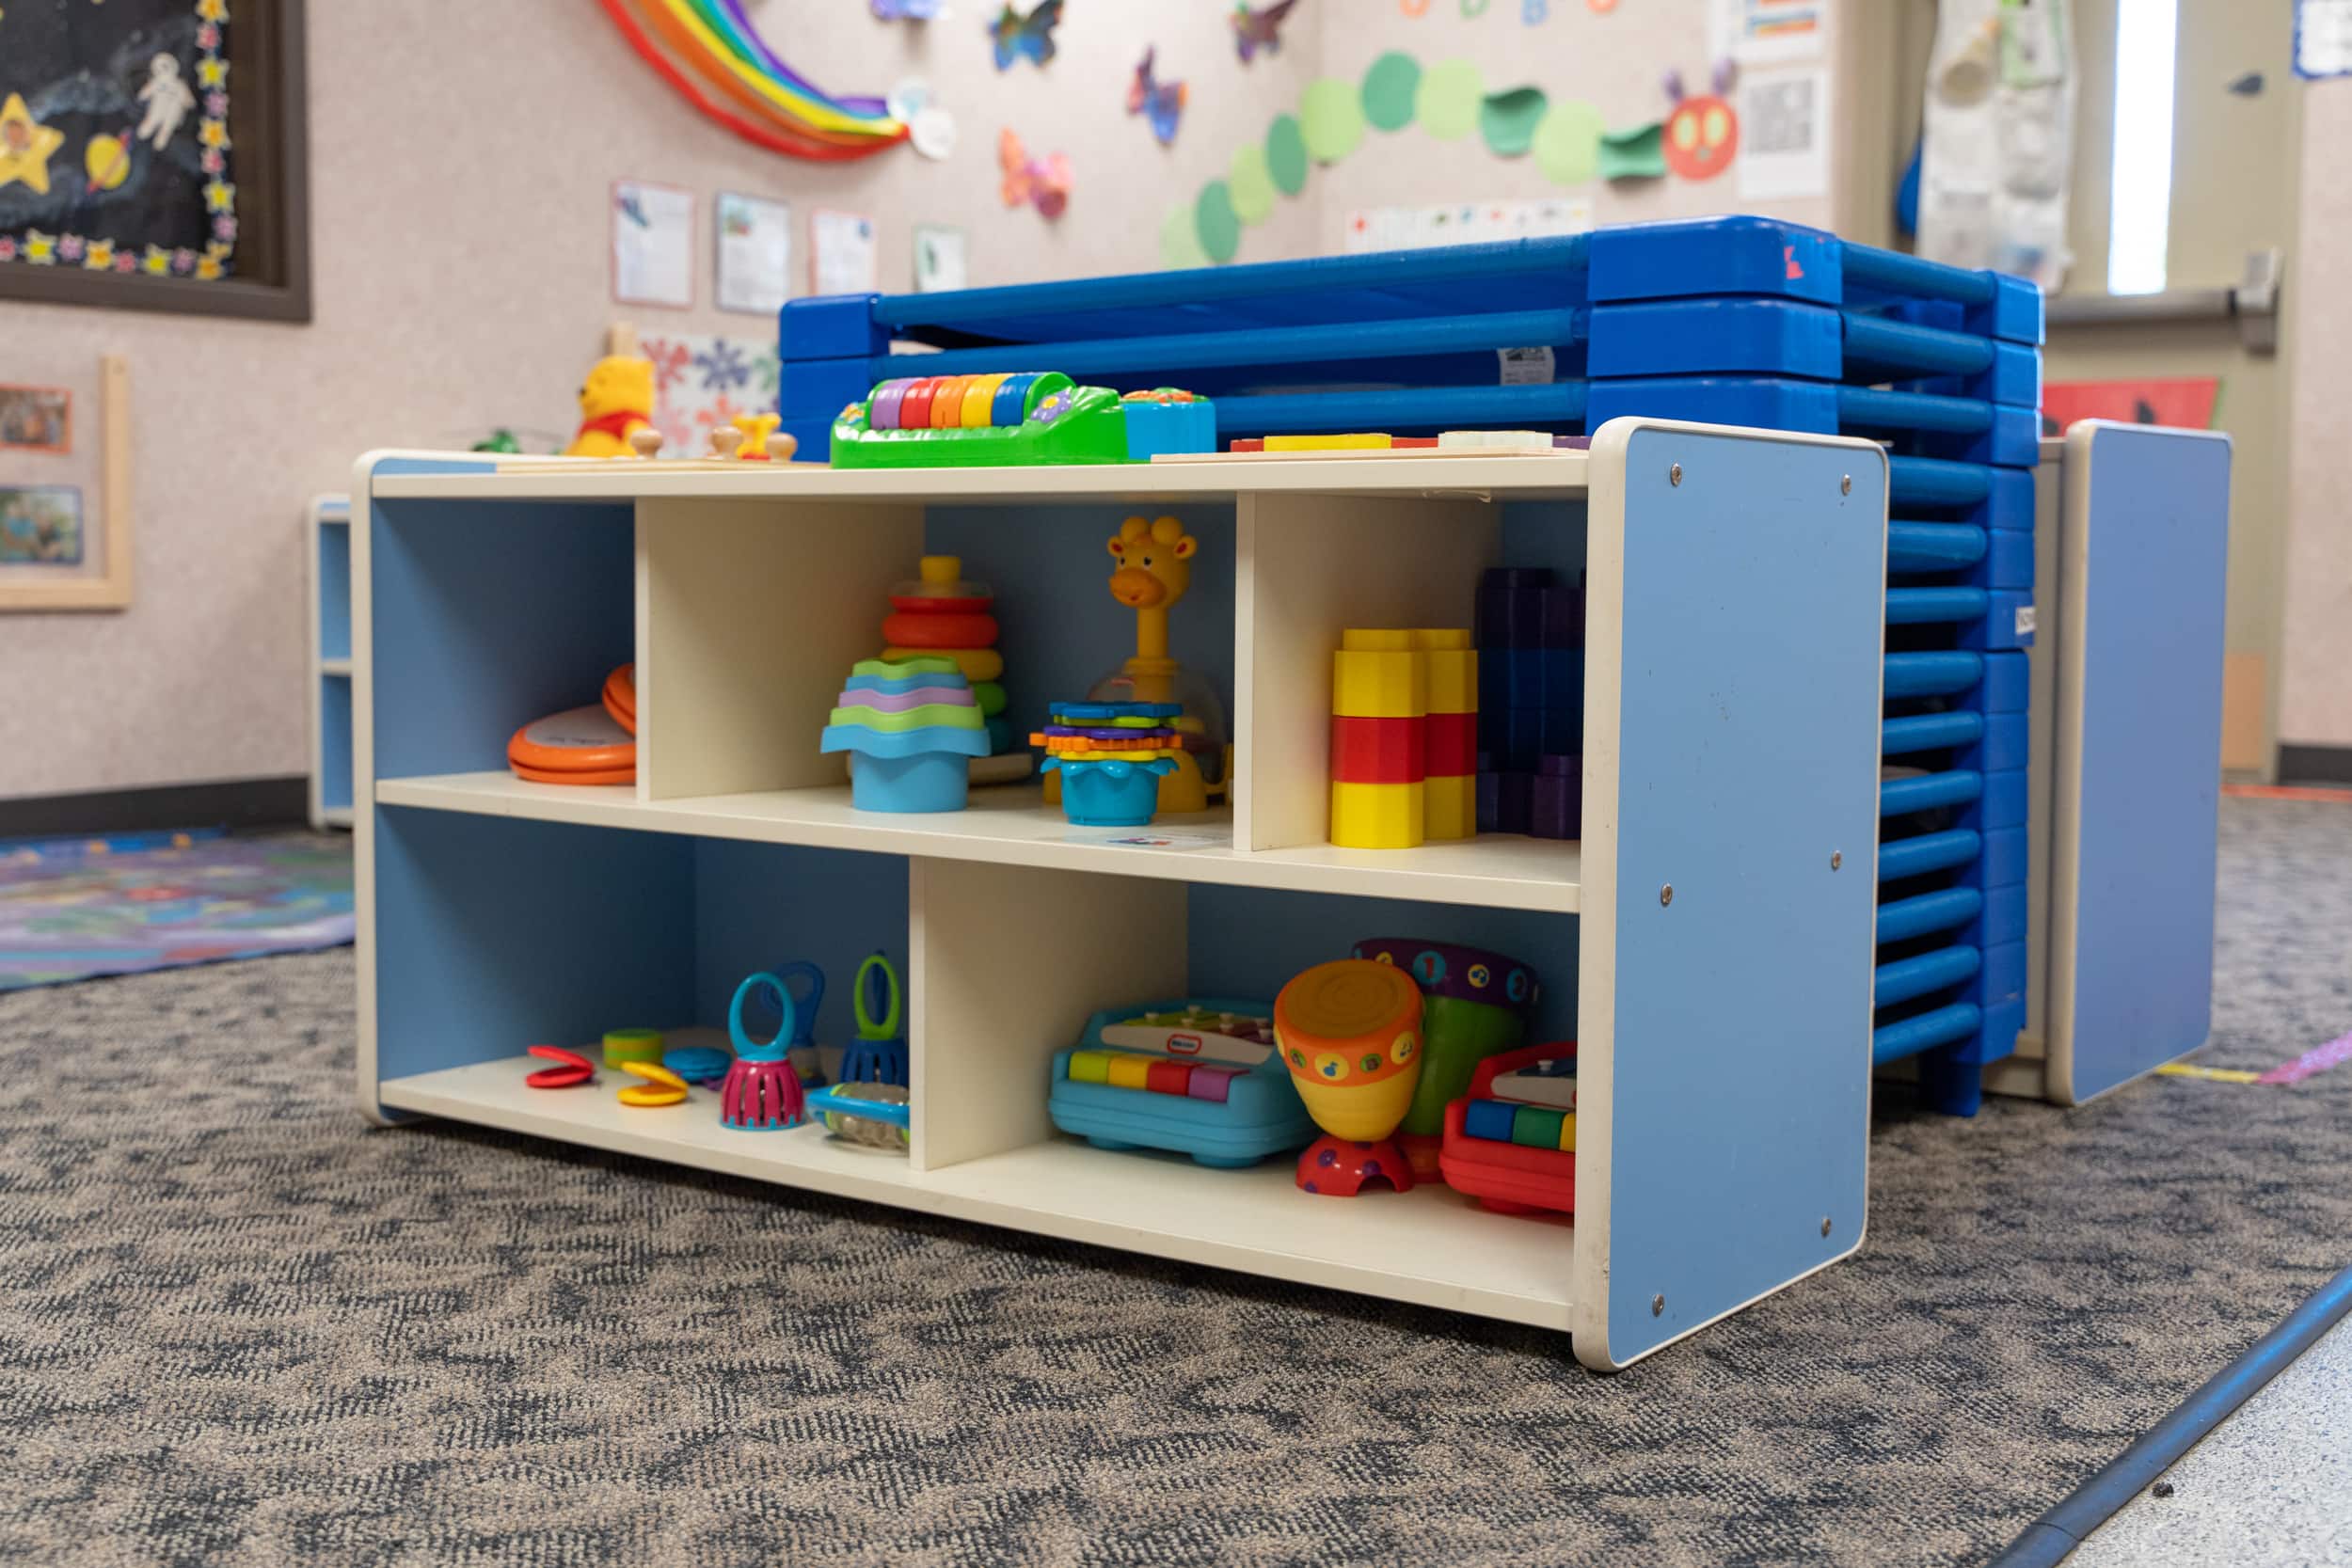 Toys in the Discovery Preschool